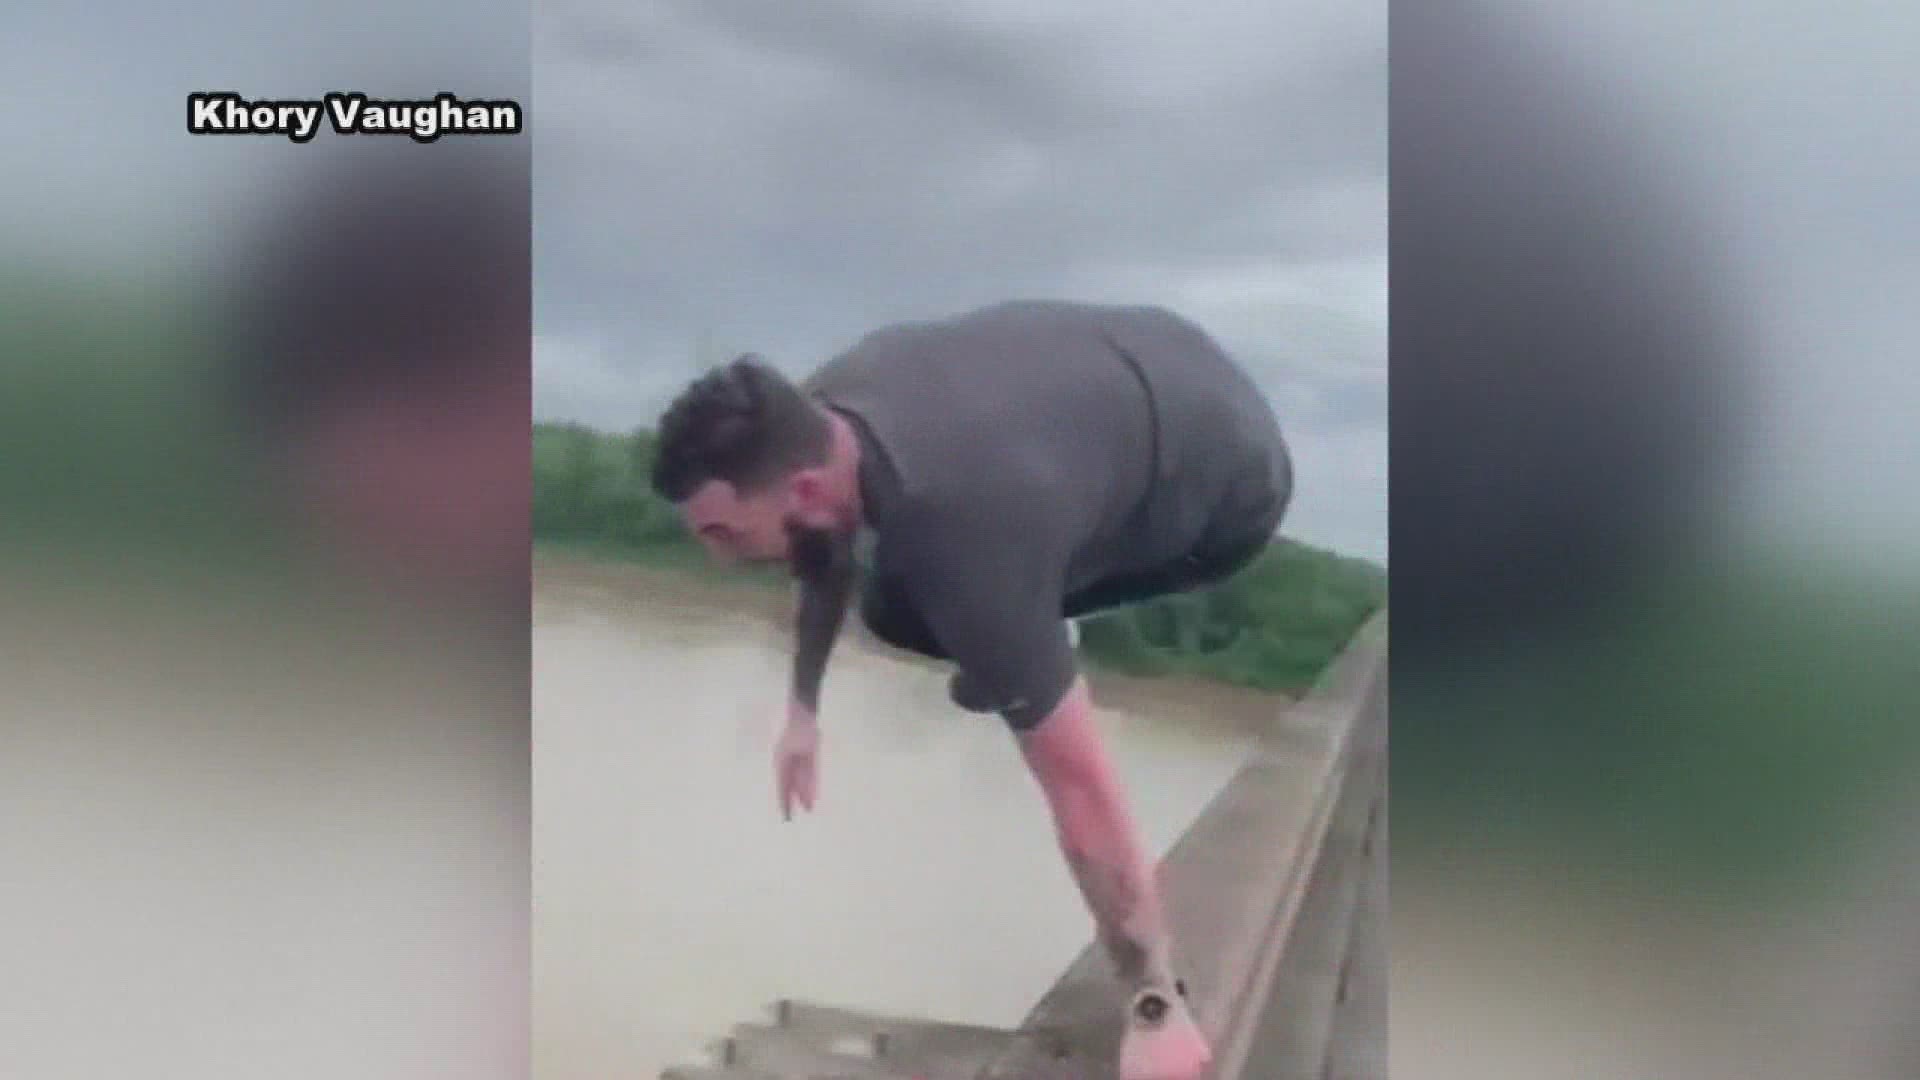 Viral video shows man jump from I10 bridge during gridlocked traffic